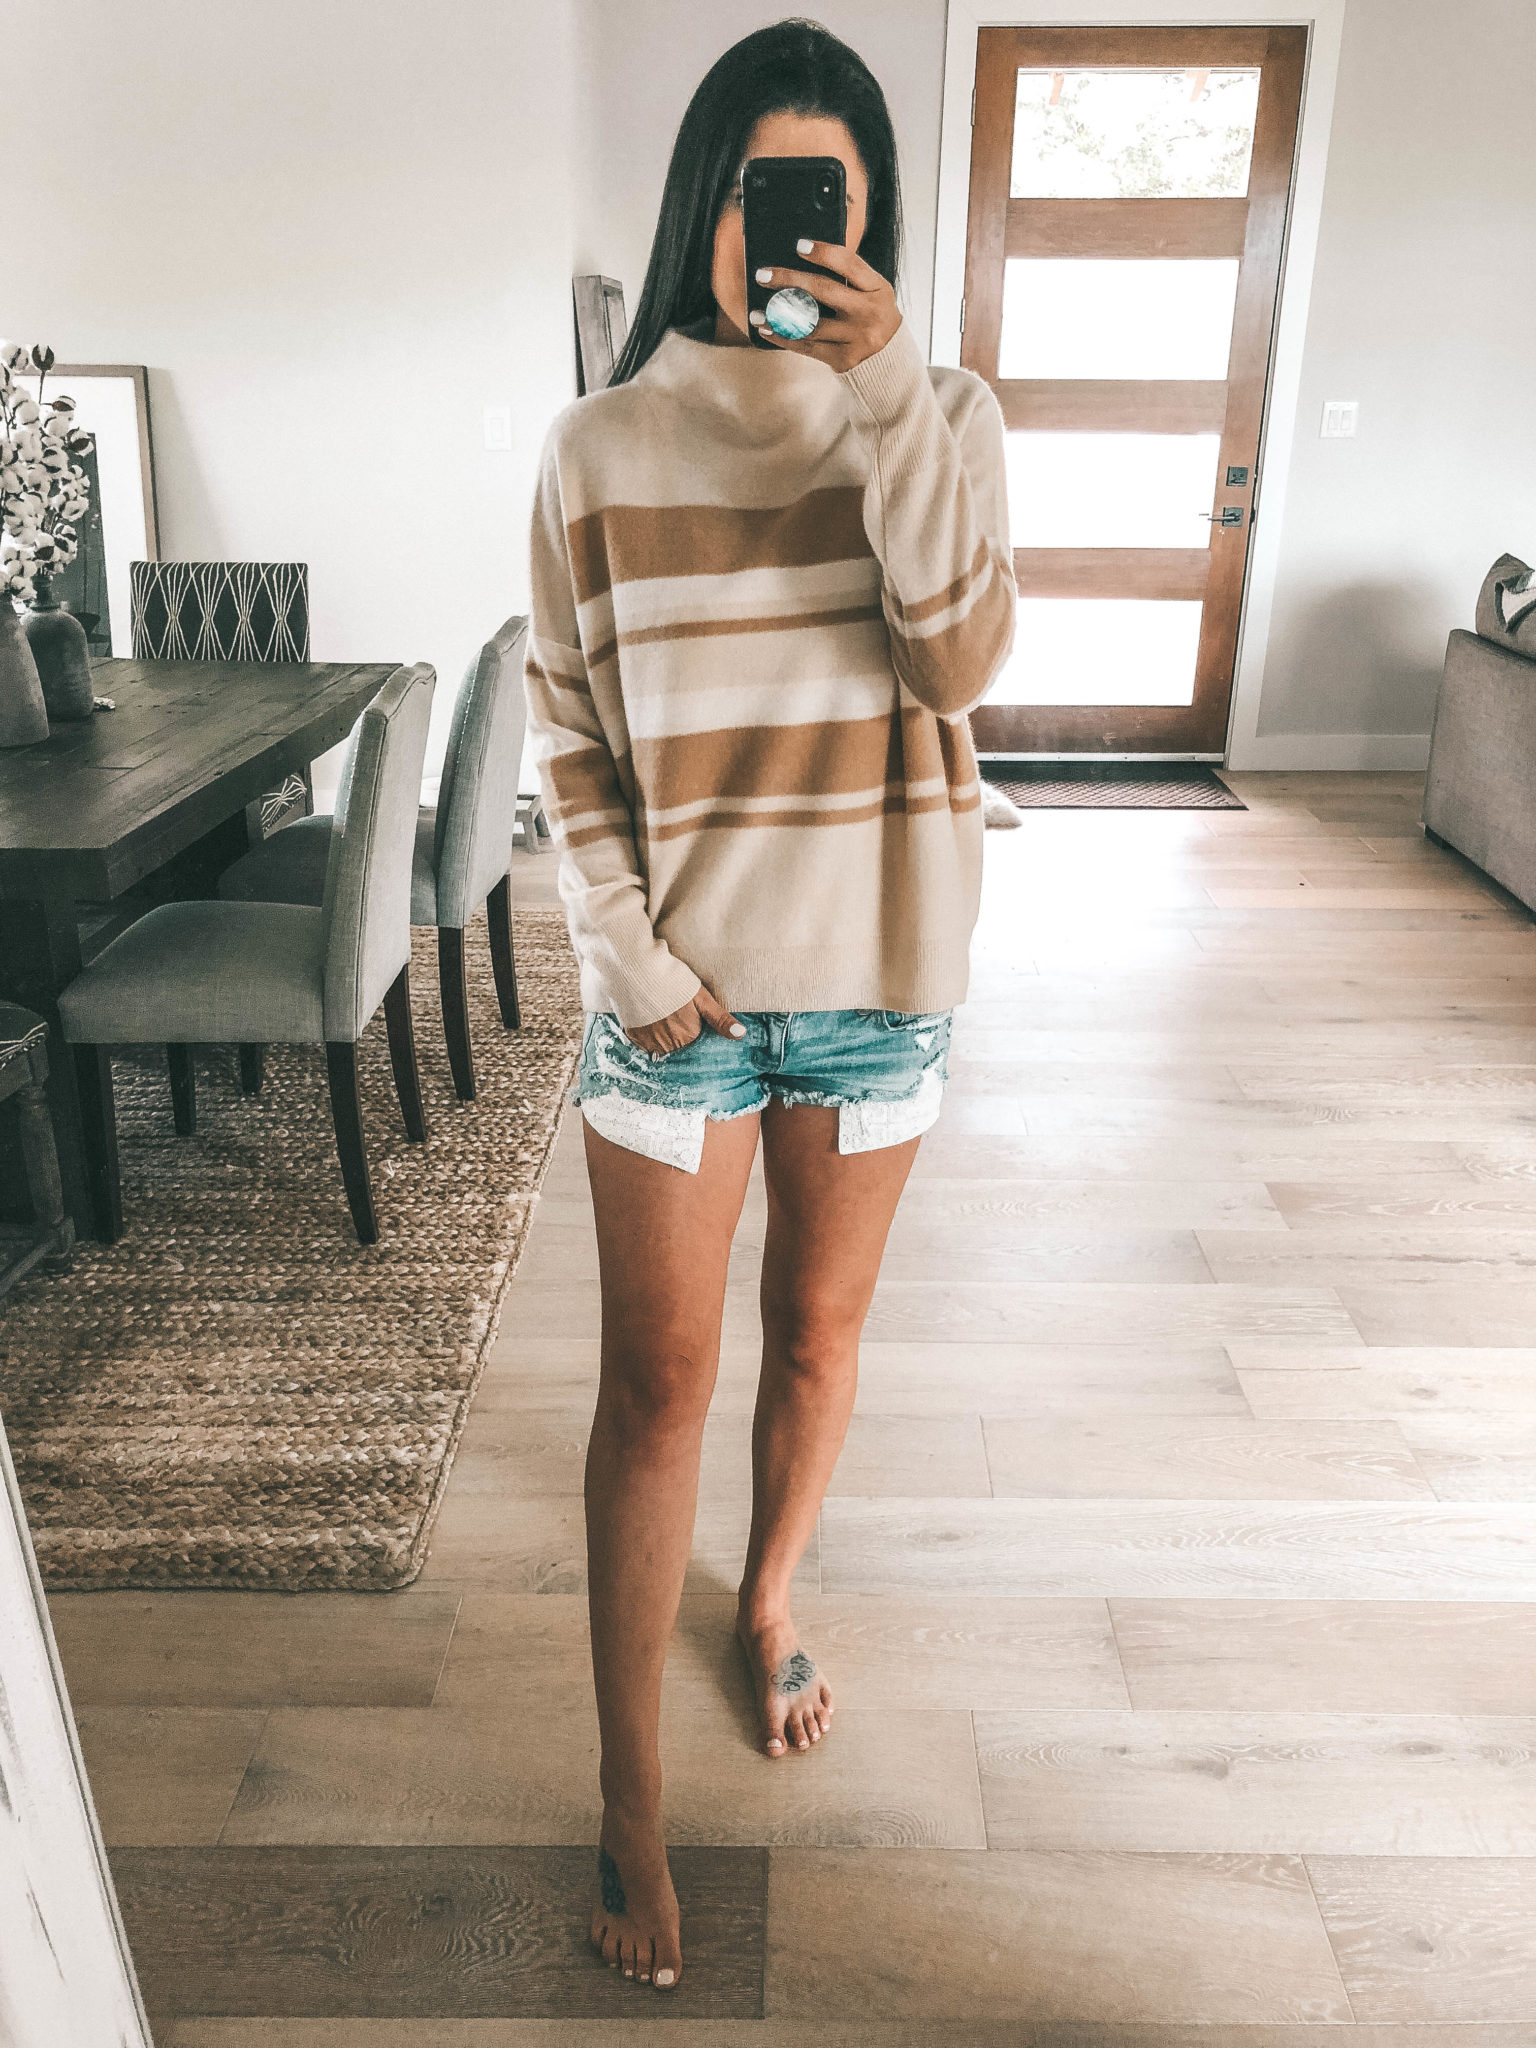 #nsale #cardigans #sweaters #nordstrom #nordstromsale #fallstyle #winterstyle #dtkaustin - Nordstrom Anniversary Sale Sweaters + Cardigans Try-On Session featured by popular Austin fashion blogger Dressed to Kill